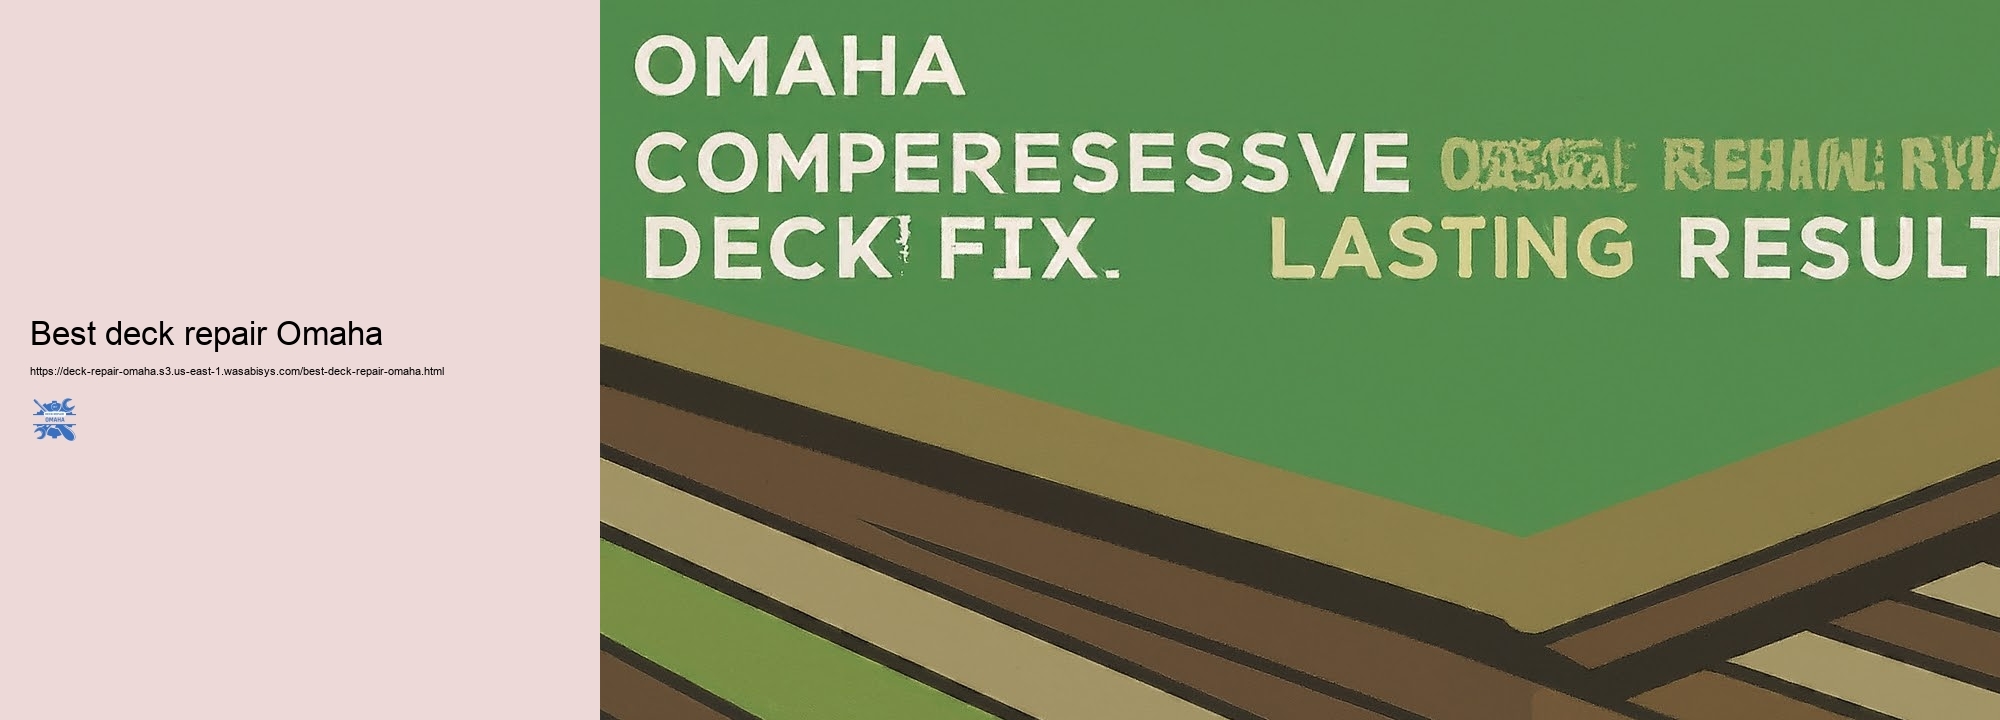 Cost-effective Deck Repair Solutions for Omaha Locals